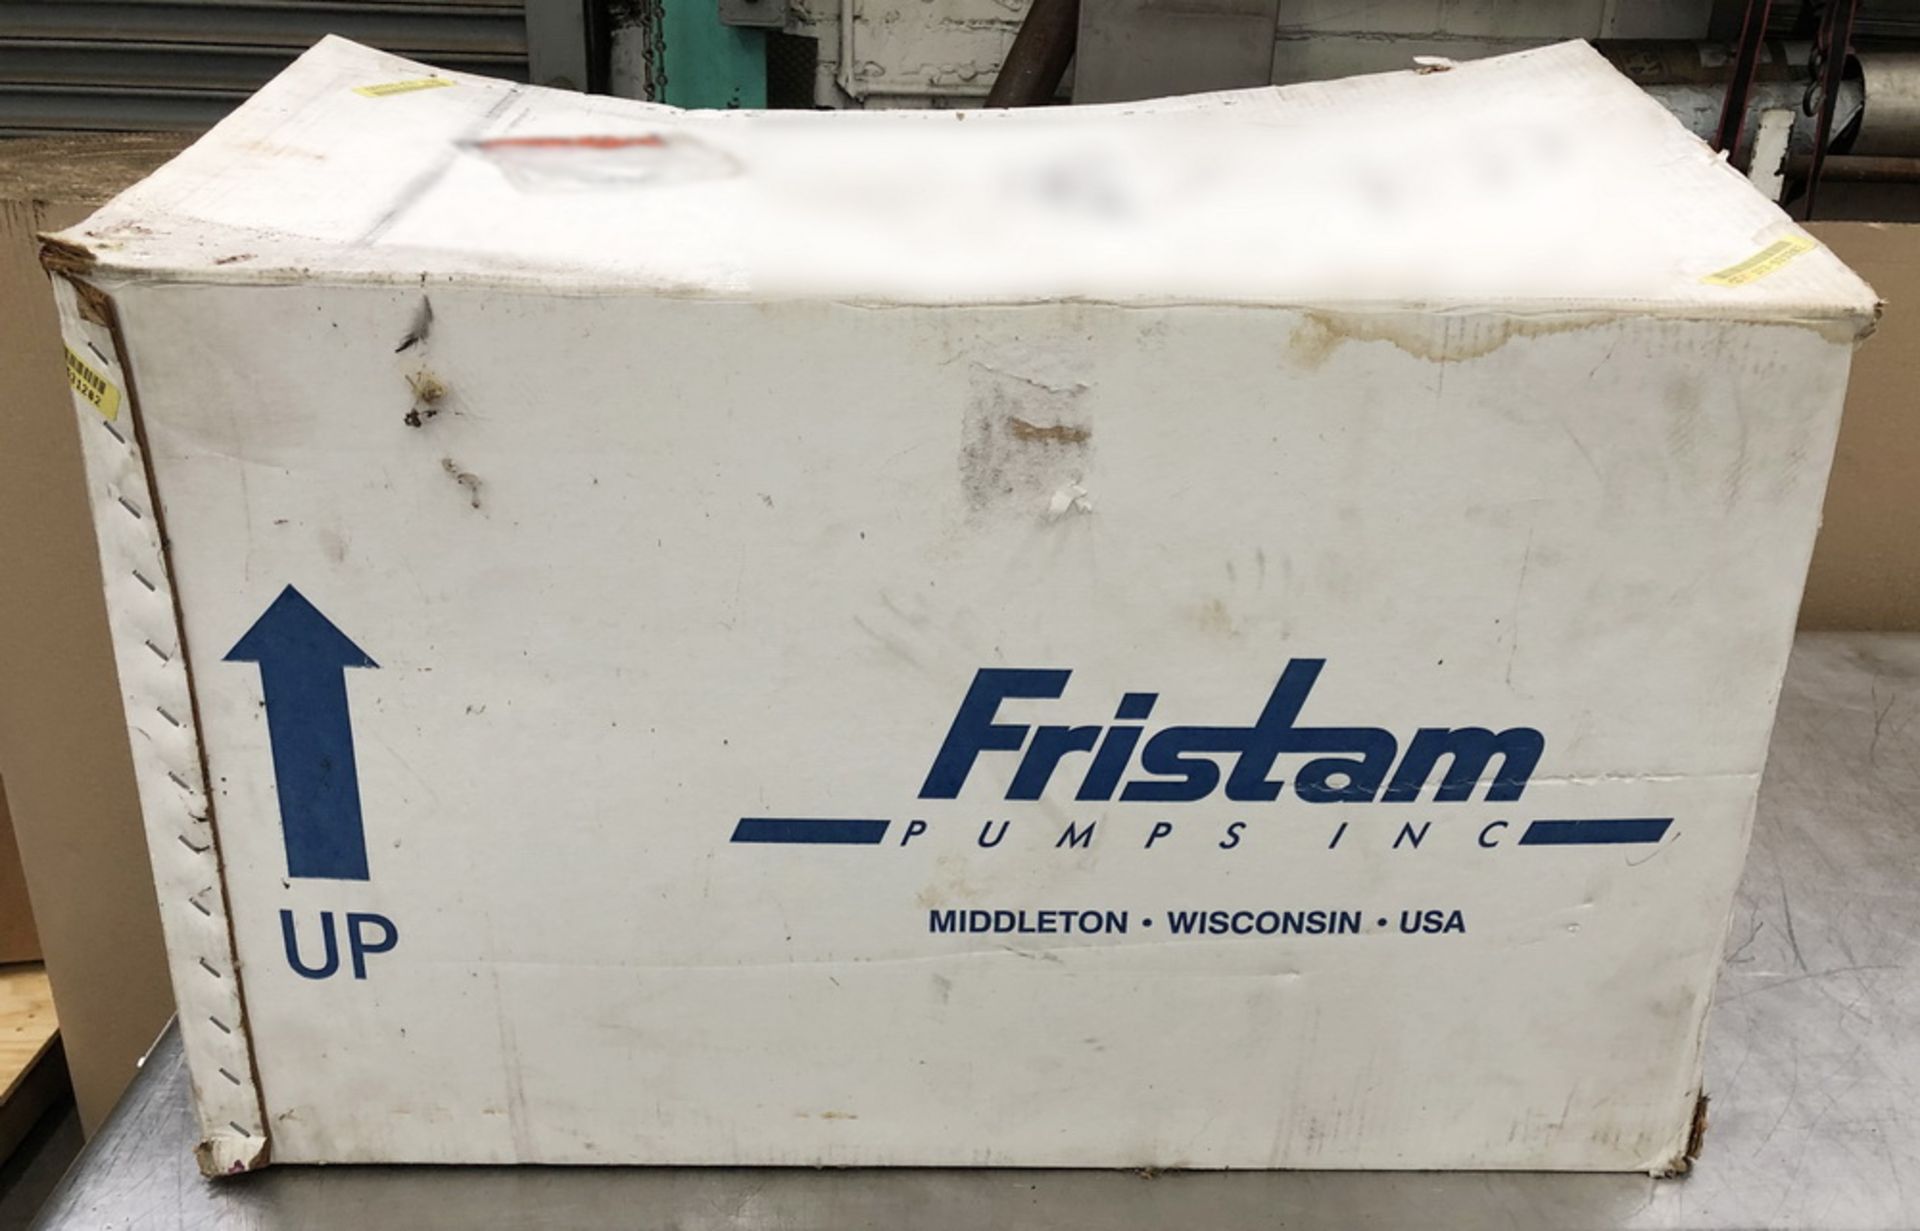 New, in box, Fristam 316SS Centrifugal Pump, Model FPX702-95, S/N FPX 702007067 - Image 5 of 5